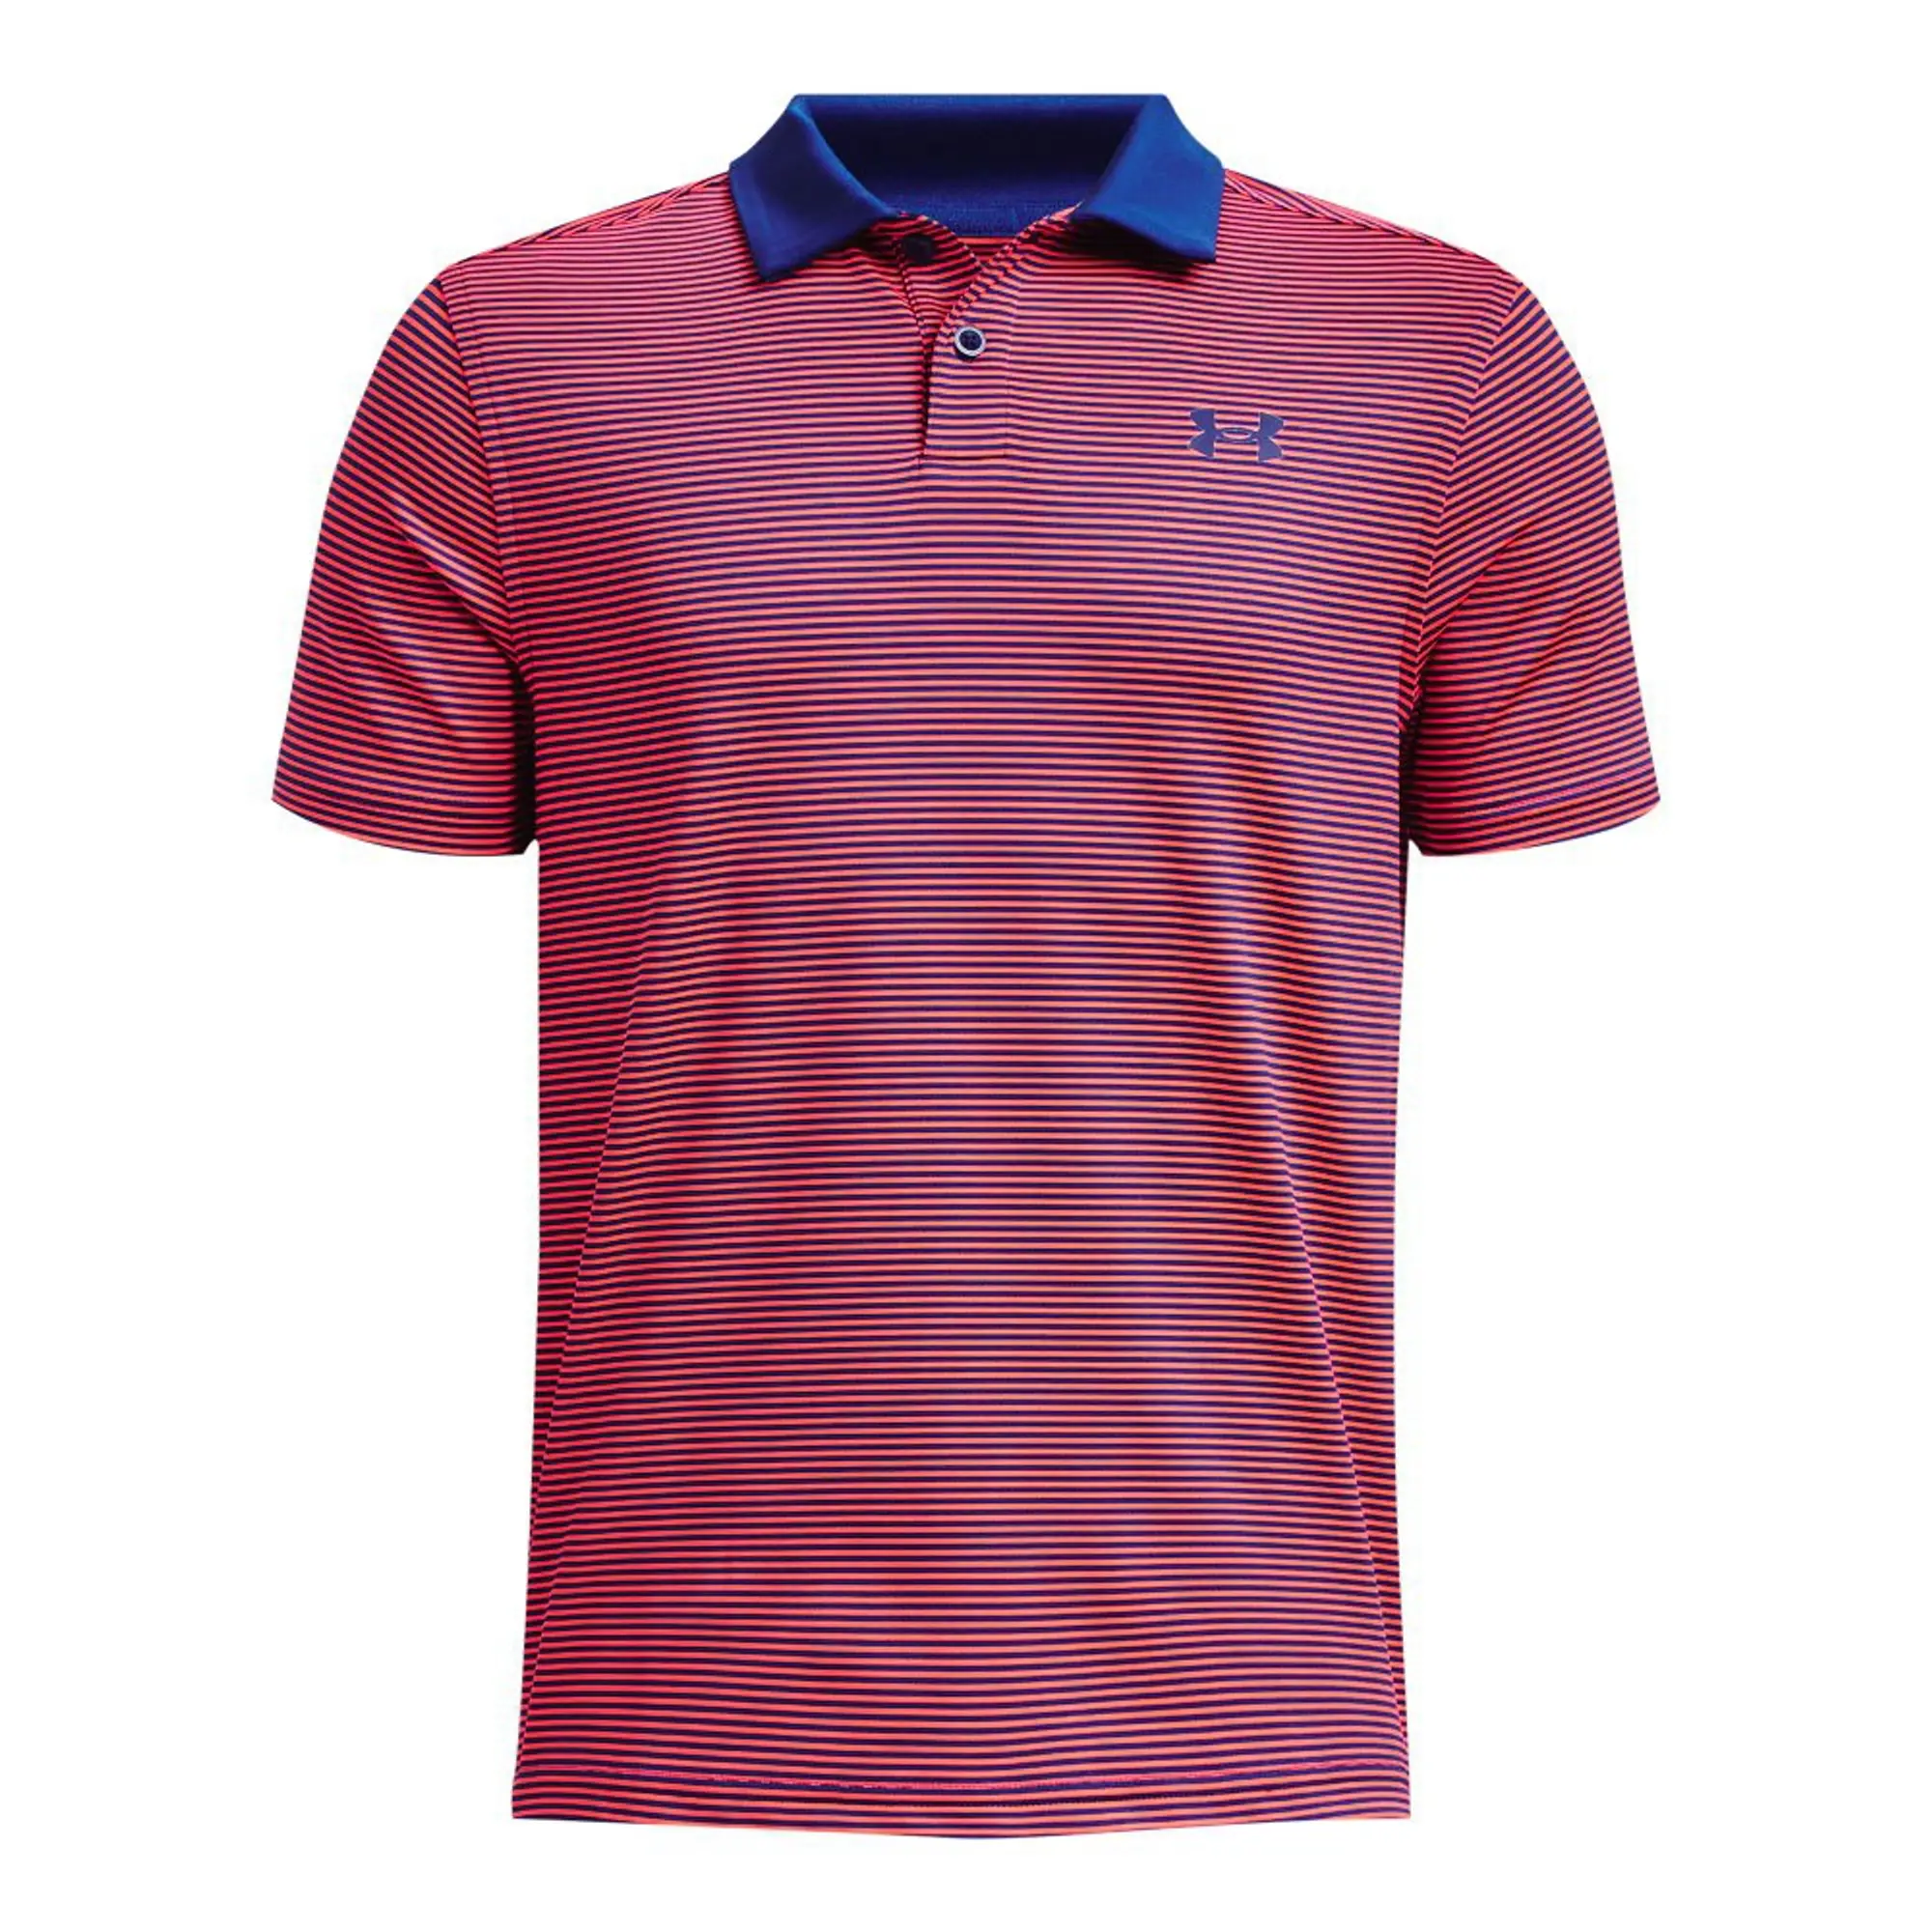 Under Armour Performance Paradise Graphic Short Sleeve Polo  - Red